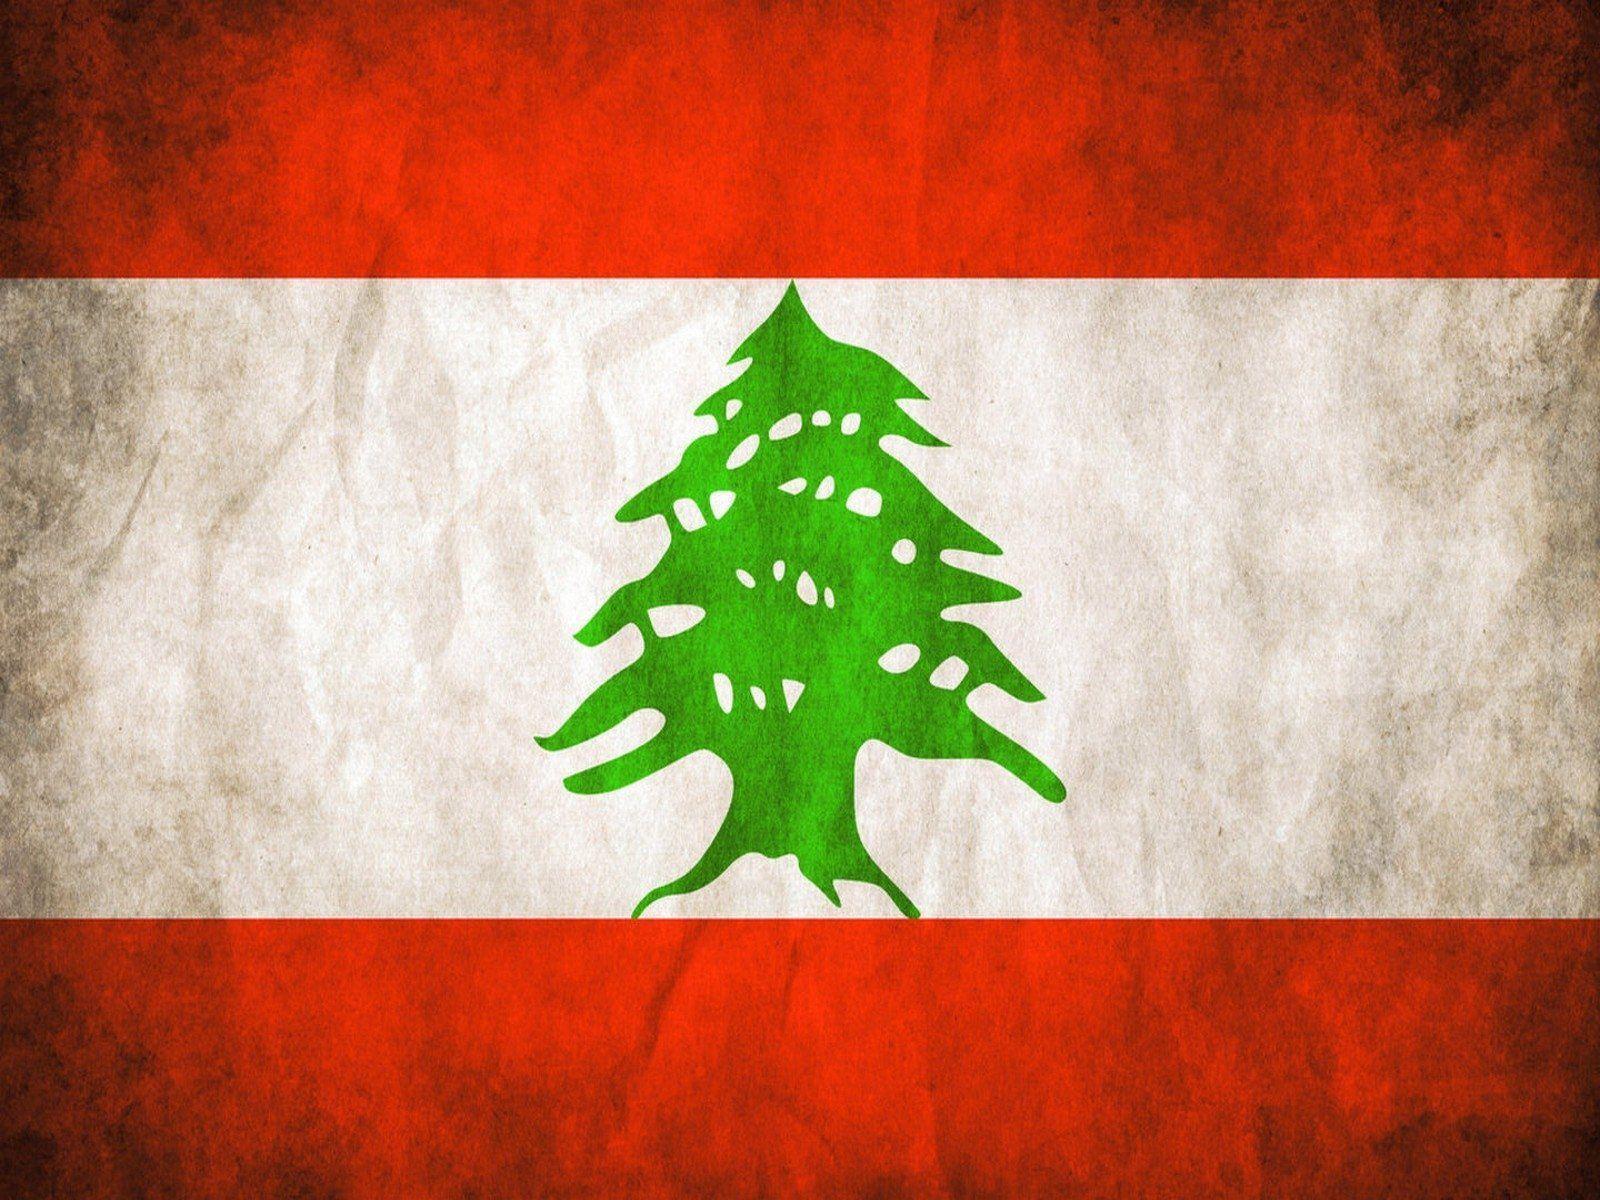 Lebanon Flag Wallpapers Wallpaper Cave Home page top wallpapers girls landscapes abstract and graphics fantasy creativeworld animals seasons flowers city and architecture holidays carshouse and comfort movies texture food & drink cartoons minimalism computer gameslove and romance. lebanon flag wallpapers wallpaper cave